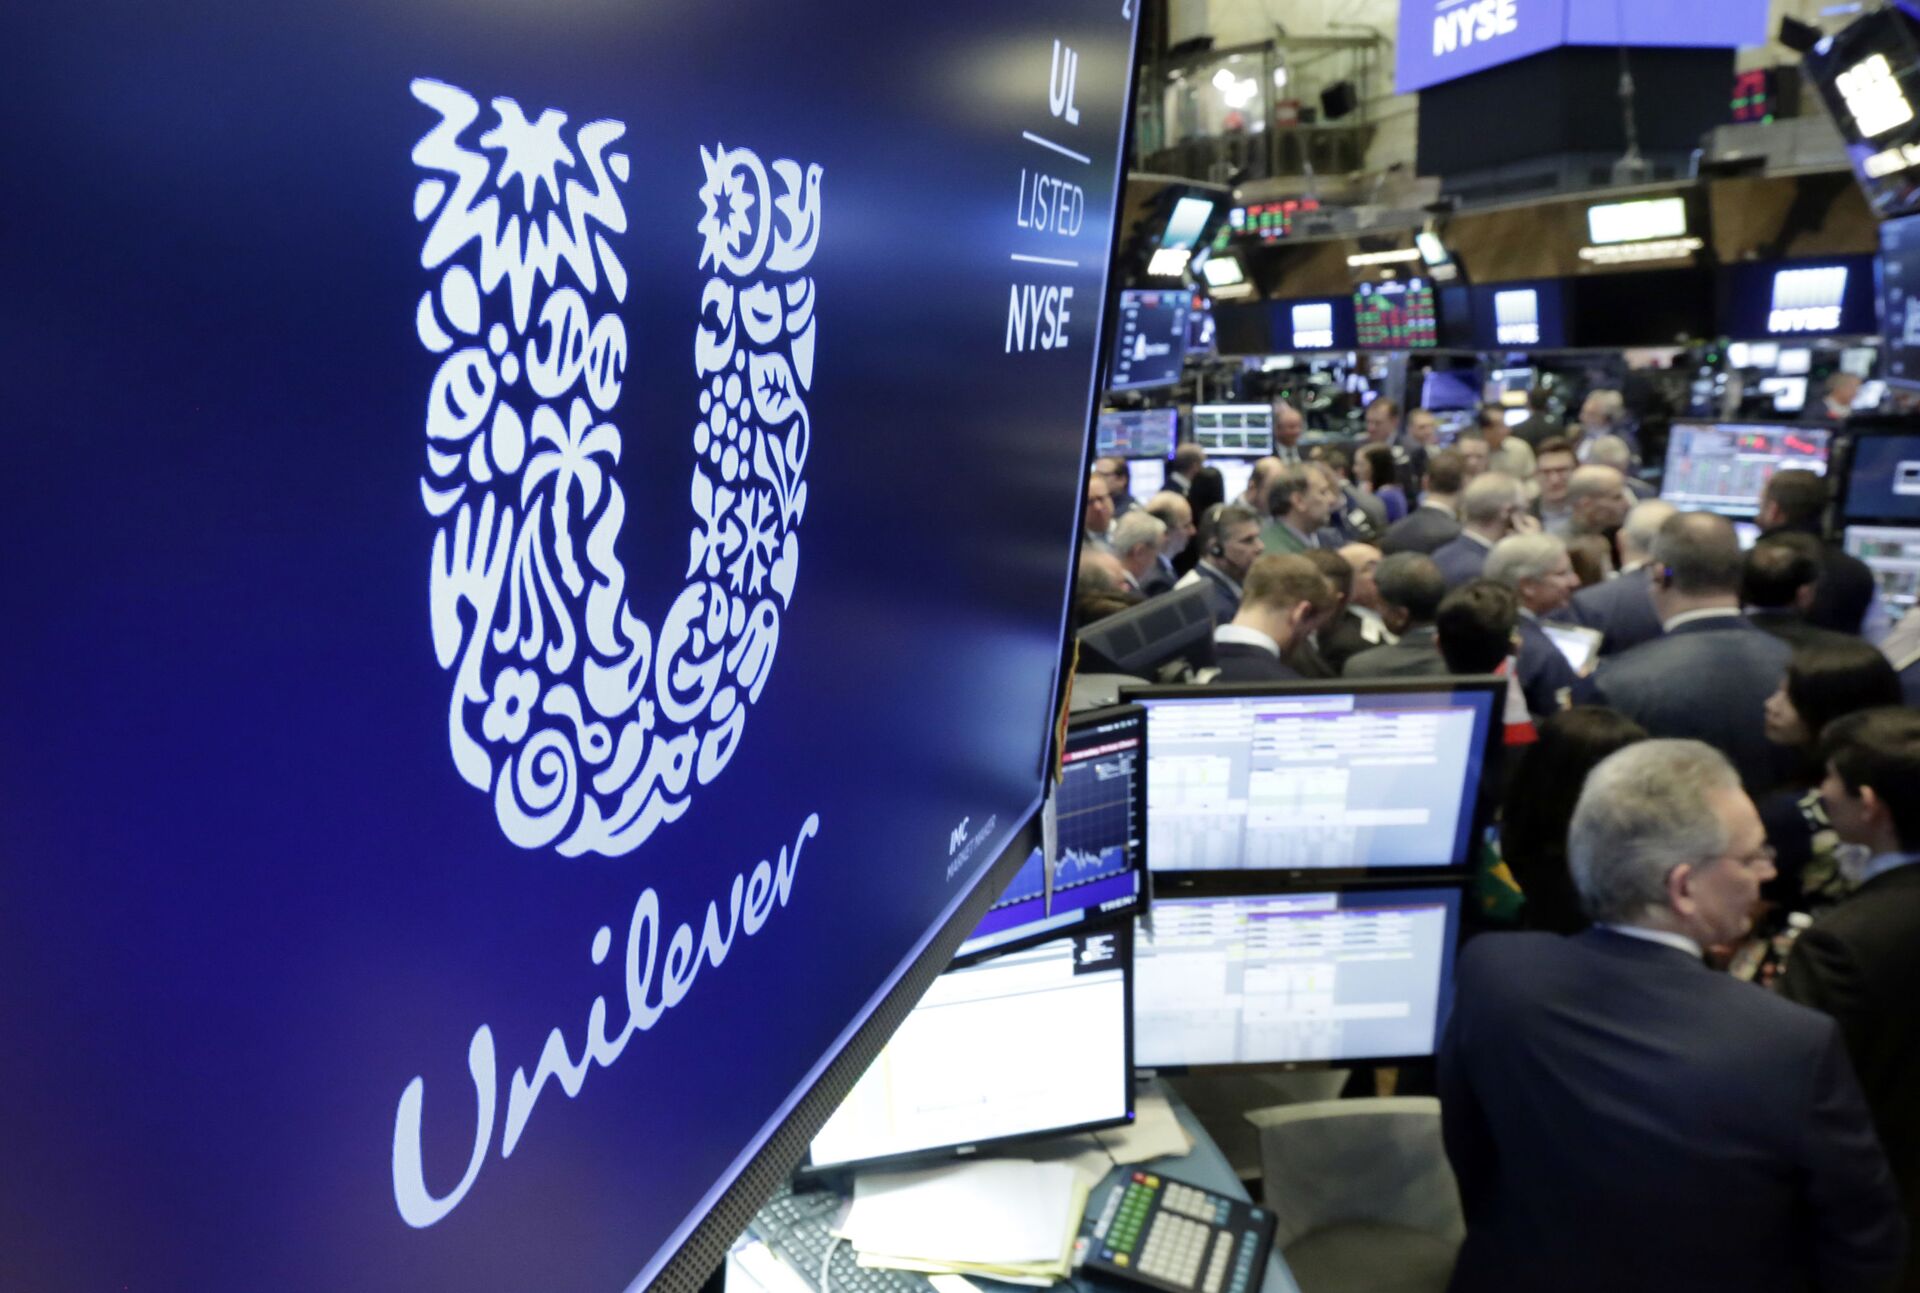 FILE - In this Thursday, March 15, 2018 file photo, the logo for Unilever appears above a trading post on the floor of the New York Stock Exchange. Consumer products giant Unilever, said Thursday July 23, 2020, that second-quarter sales were only slightly lower than the same period a year ago despite the lockdown measures triggered by the global fight against the coronavirus. - Sputnik International, 1920, 07.09.2021